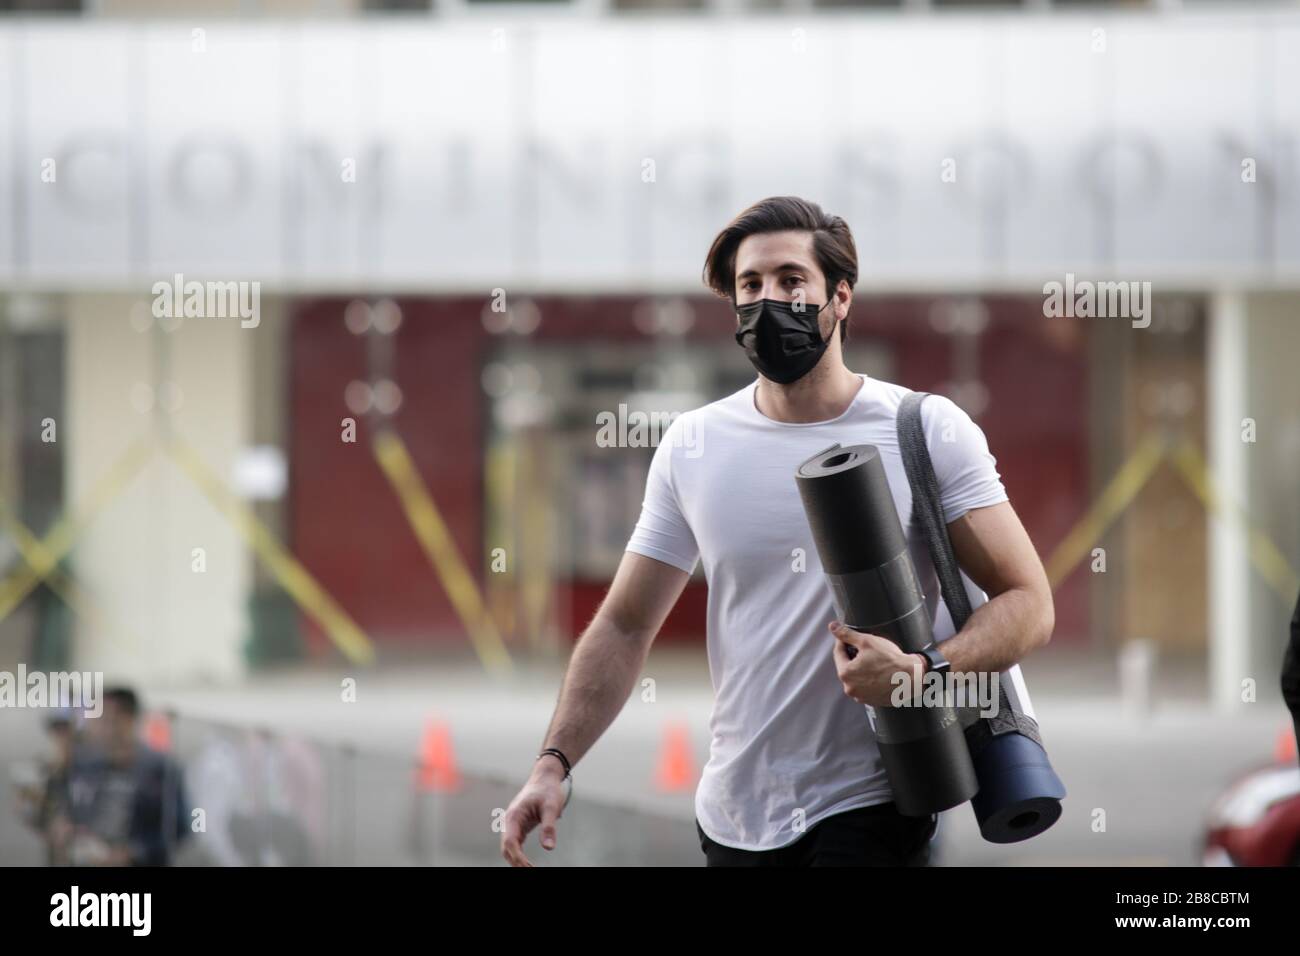 Mexico City, Mexico. 20th Mar, 2020. A man wearing mask walks on a street in Mexico City, Mexico, March 20, 2020. According to Mexico's health ministry, the total number of confirmed COVID-19 cases has climbed to 203 as of 7 p.m. Friday local time. Credit: Francisco Canedo/Xinhua/Alamy Live News Stock Photo